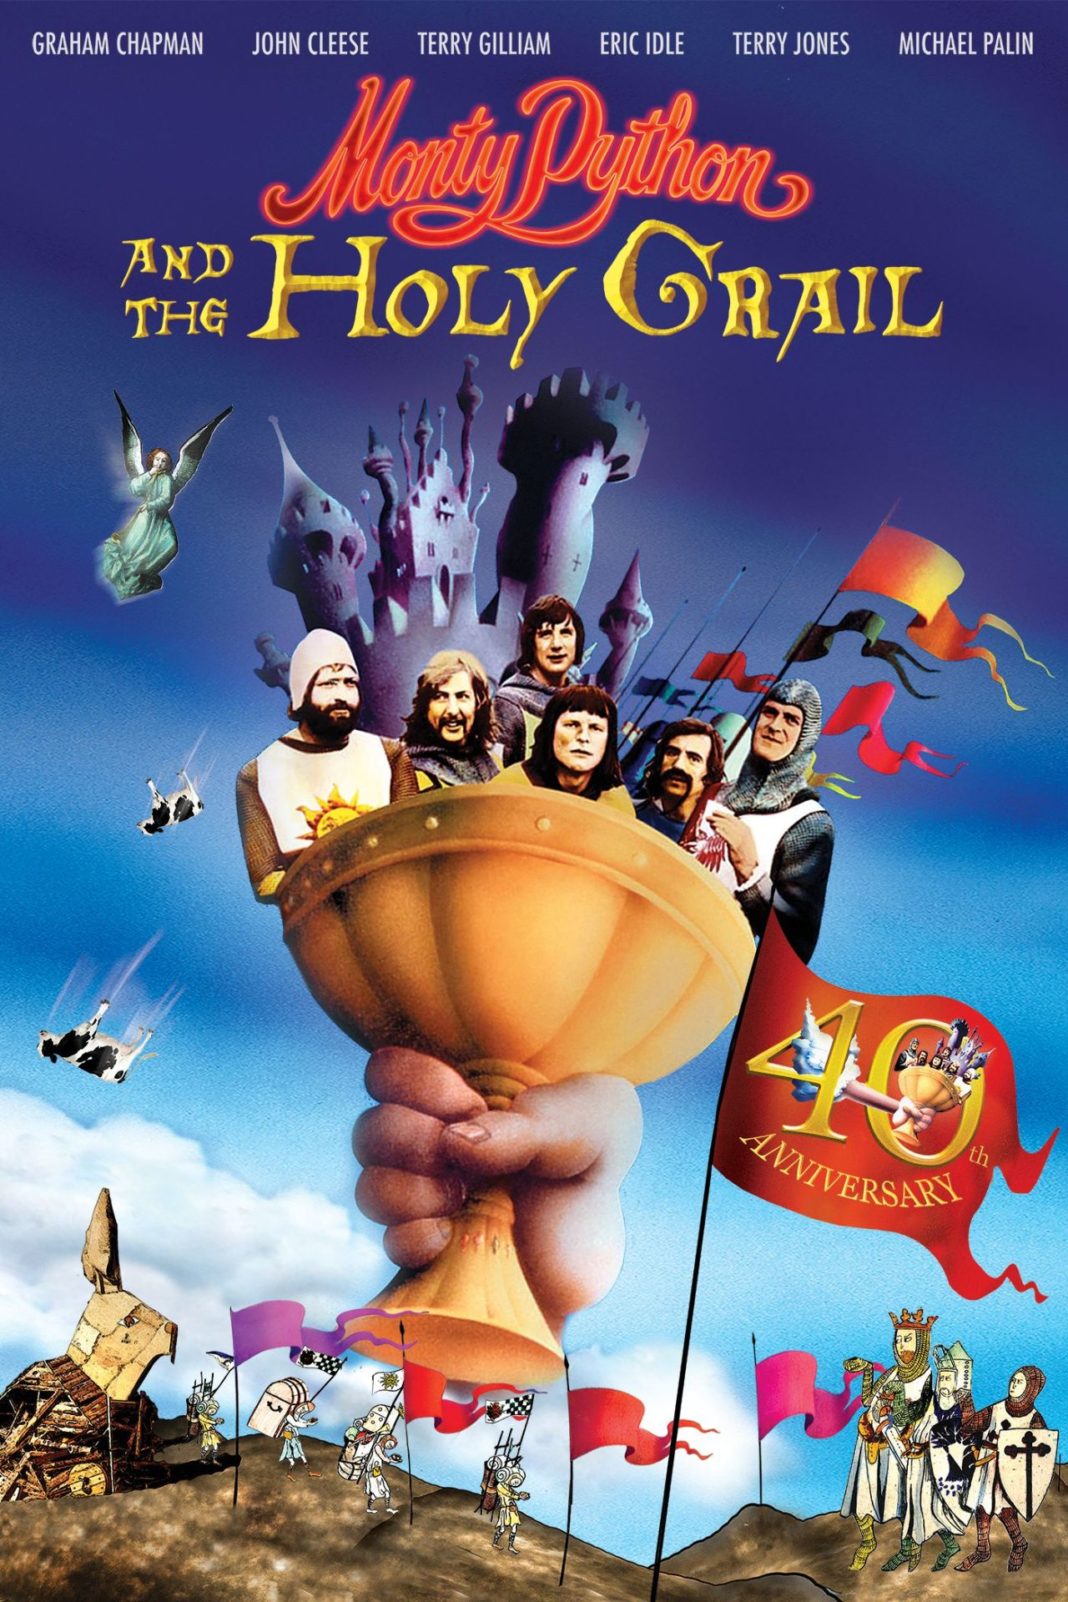 Movie Posters Monty Python and the Holy Grail (1975) CoDesign